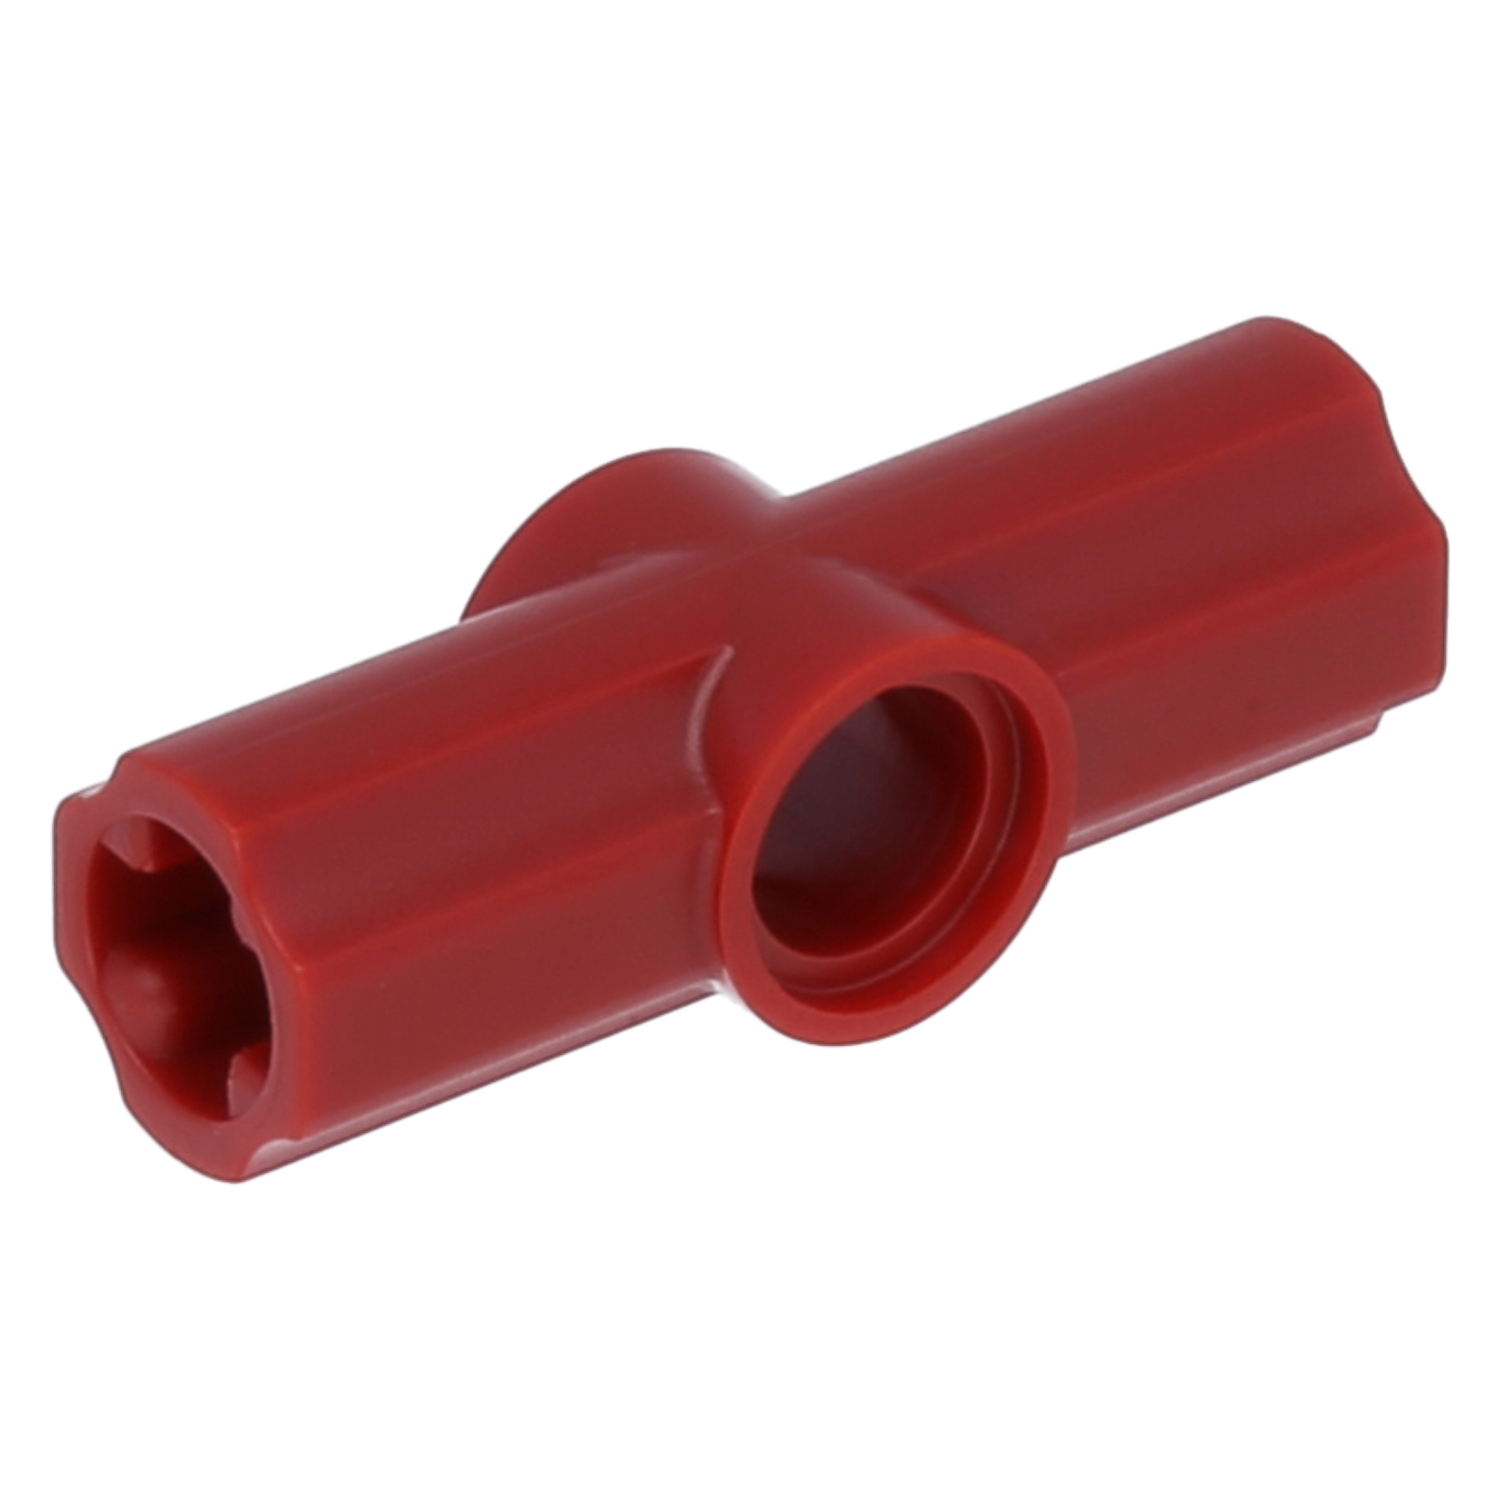 LEGO Technic axis - axis and pen connector (angled)